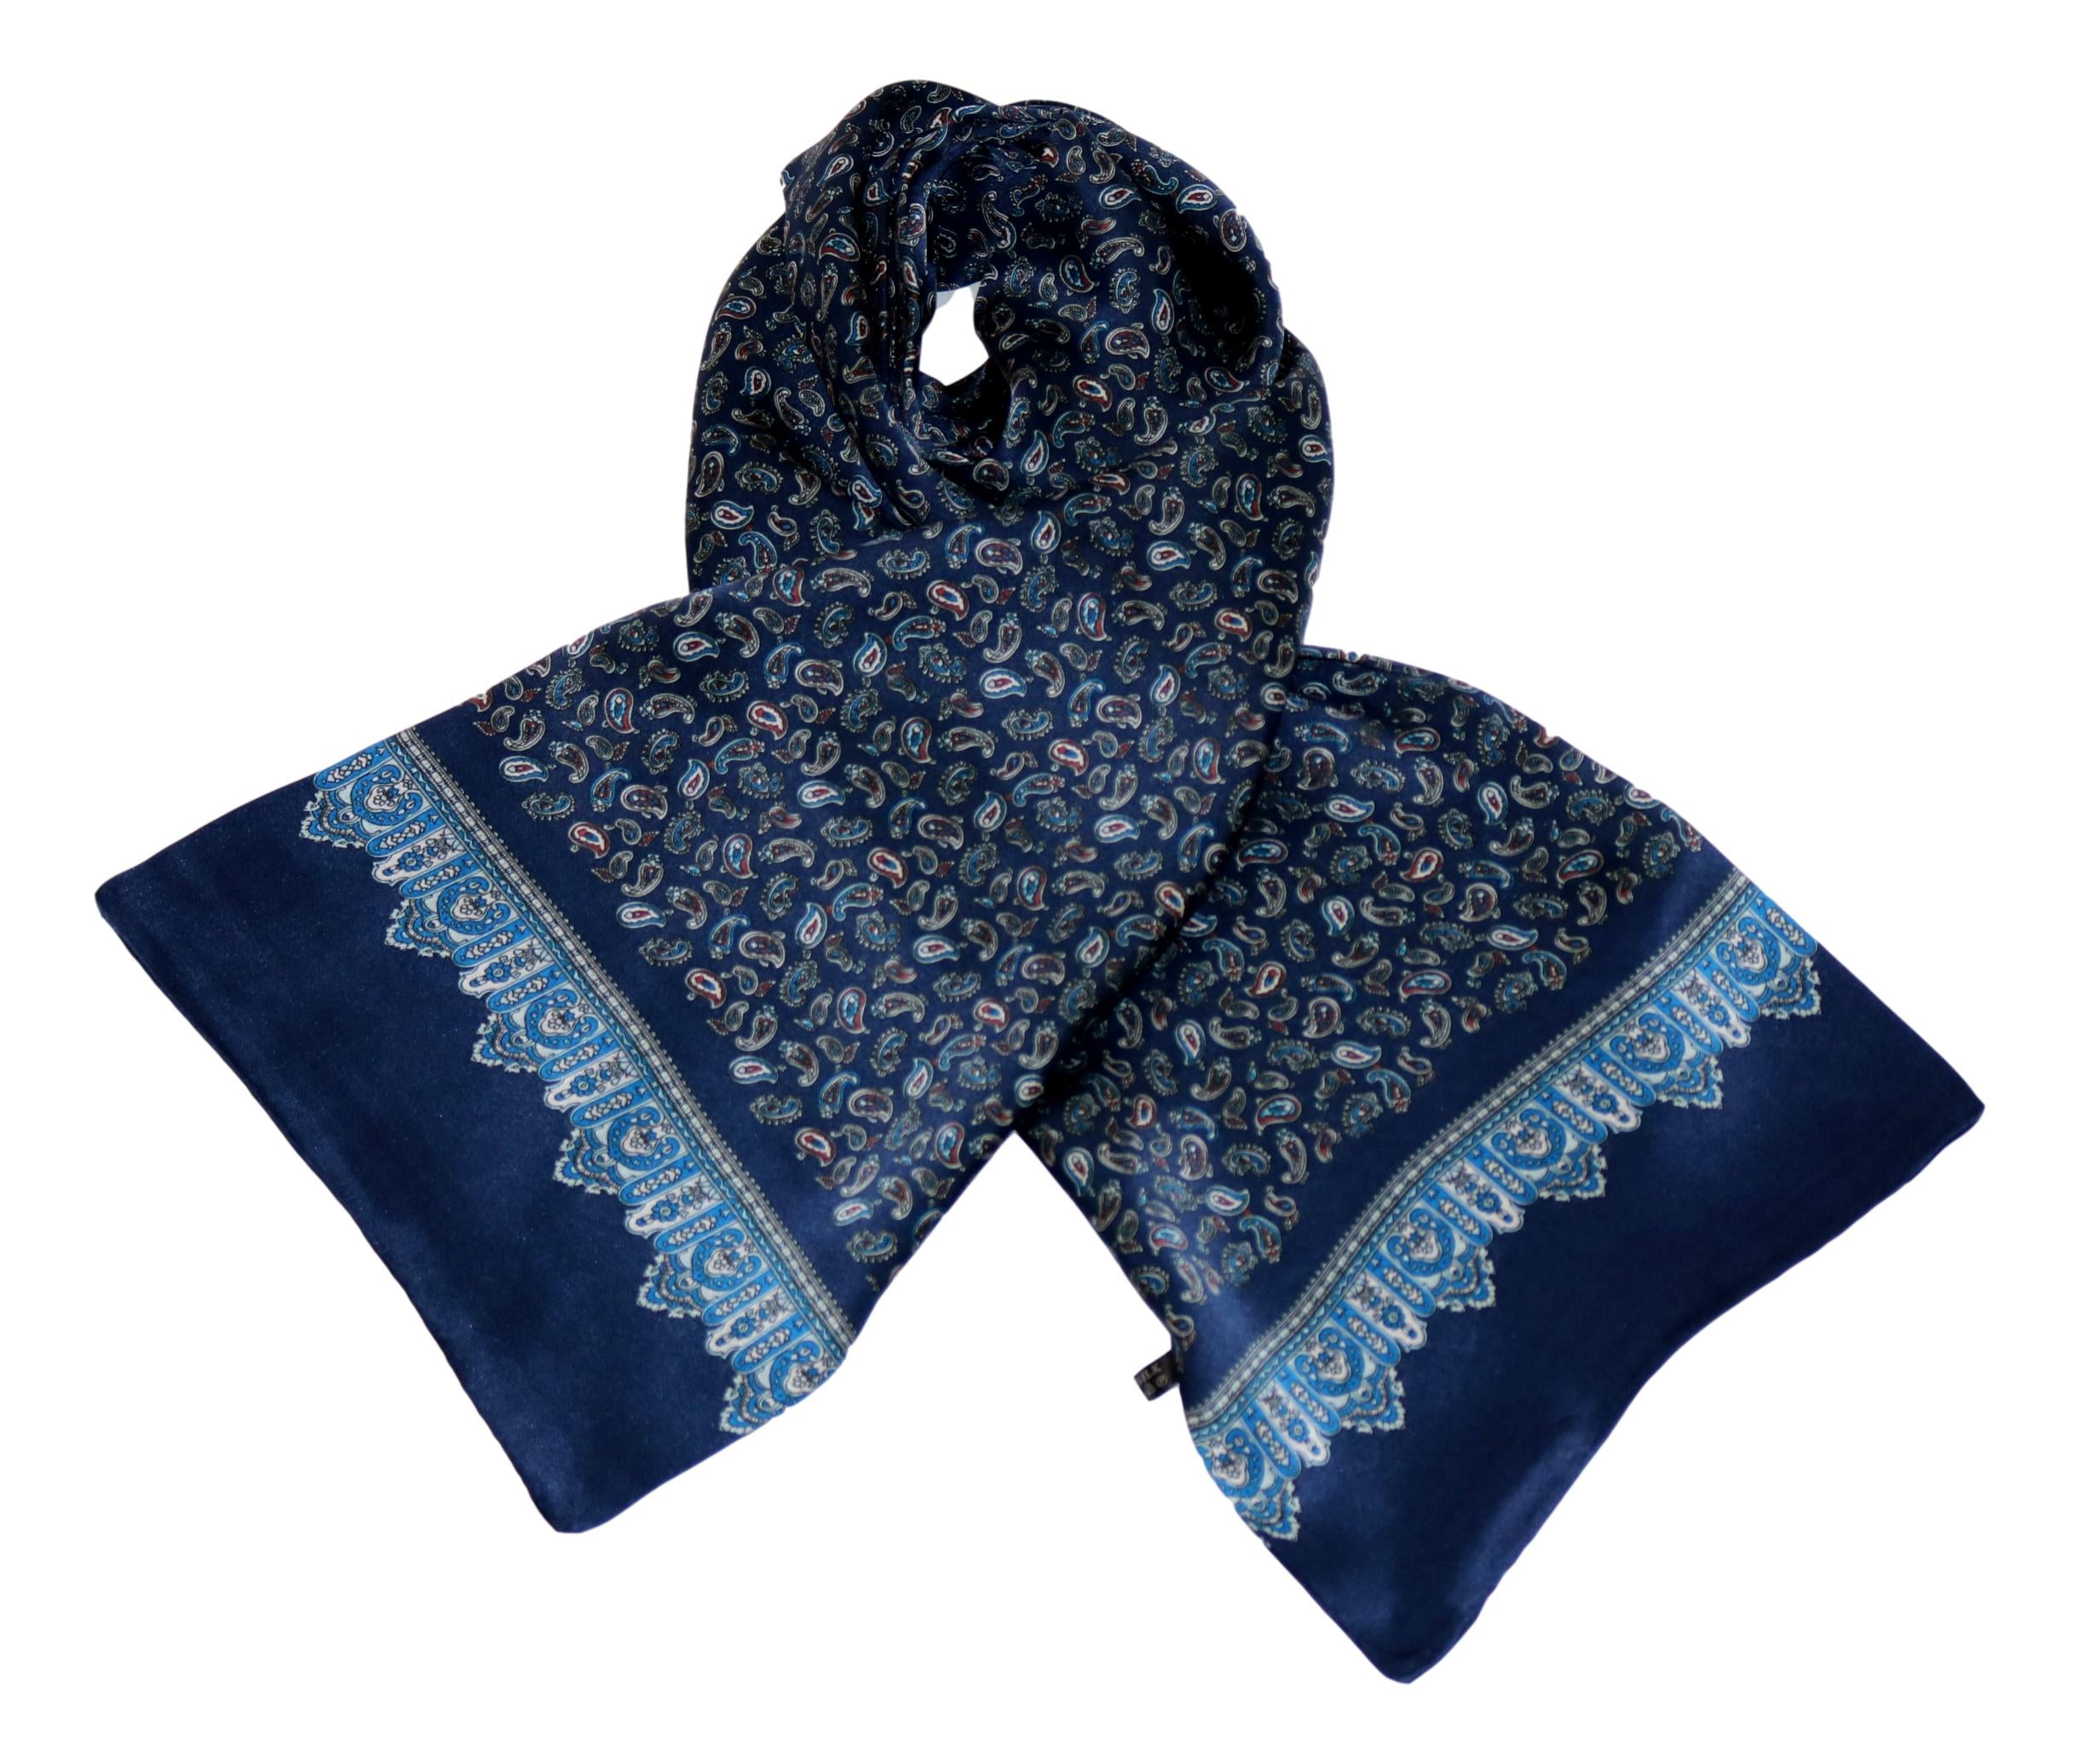 It's a Dog's Life Claret & Navy Large Square Silk Scarf